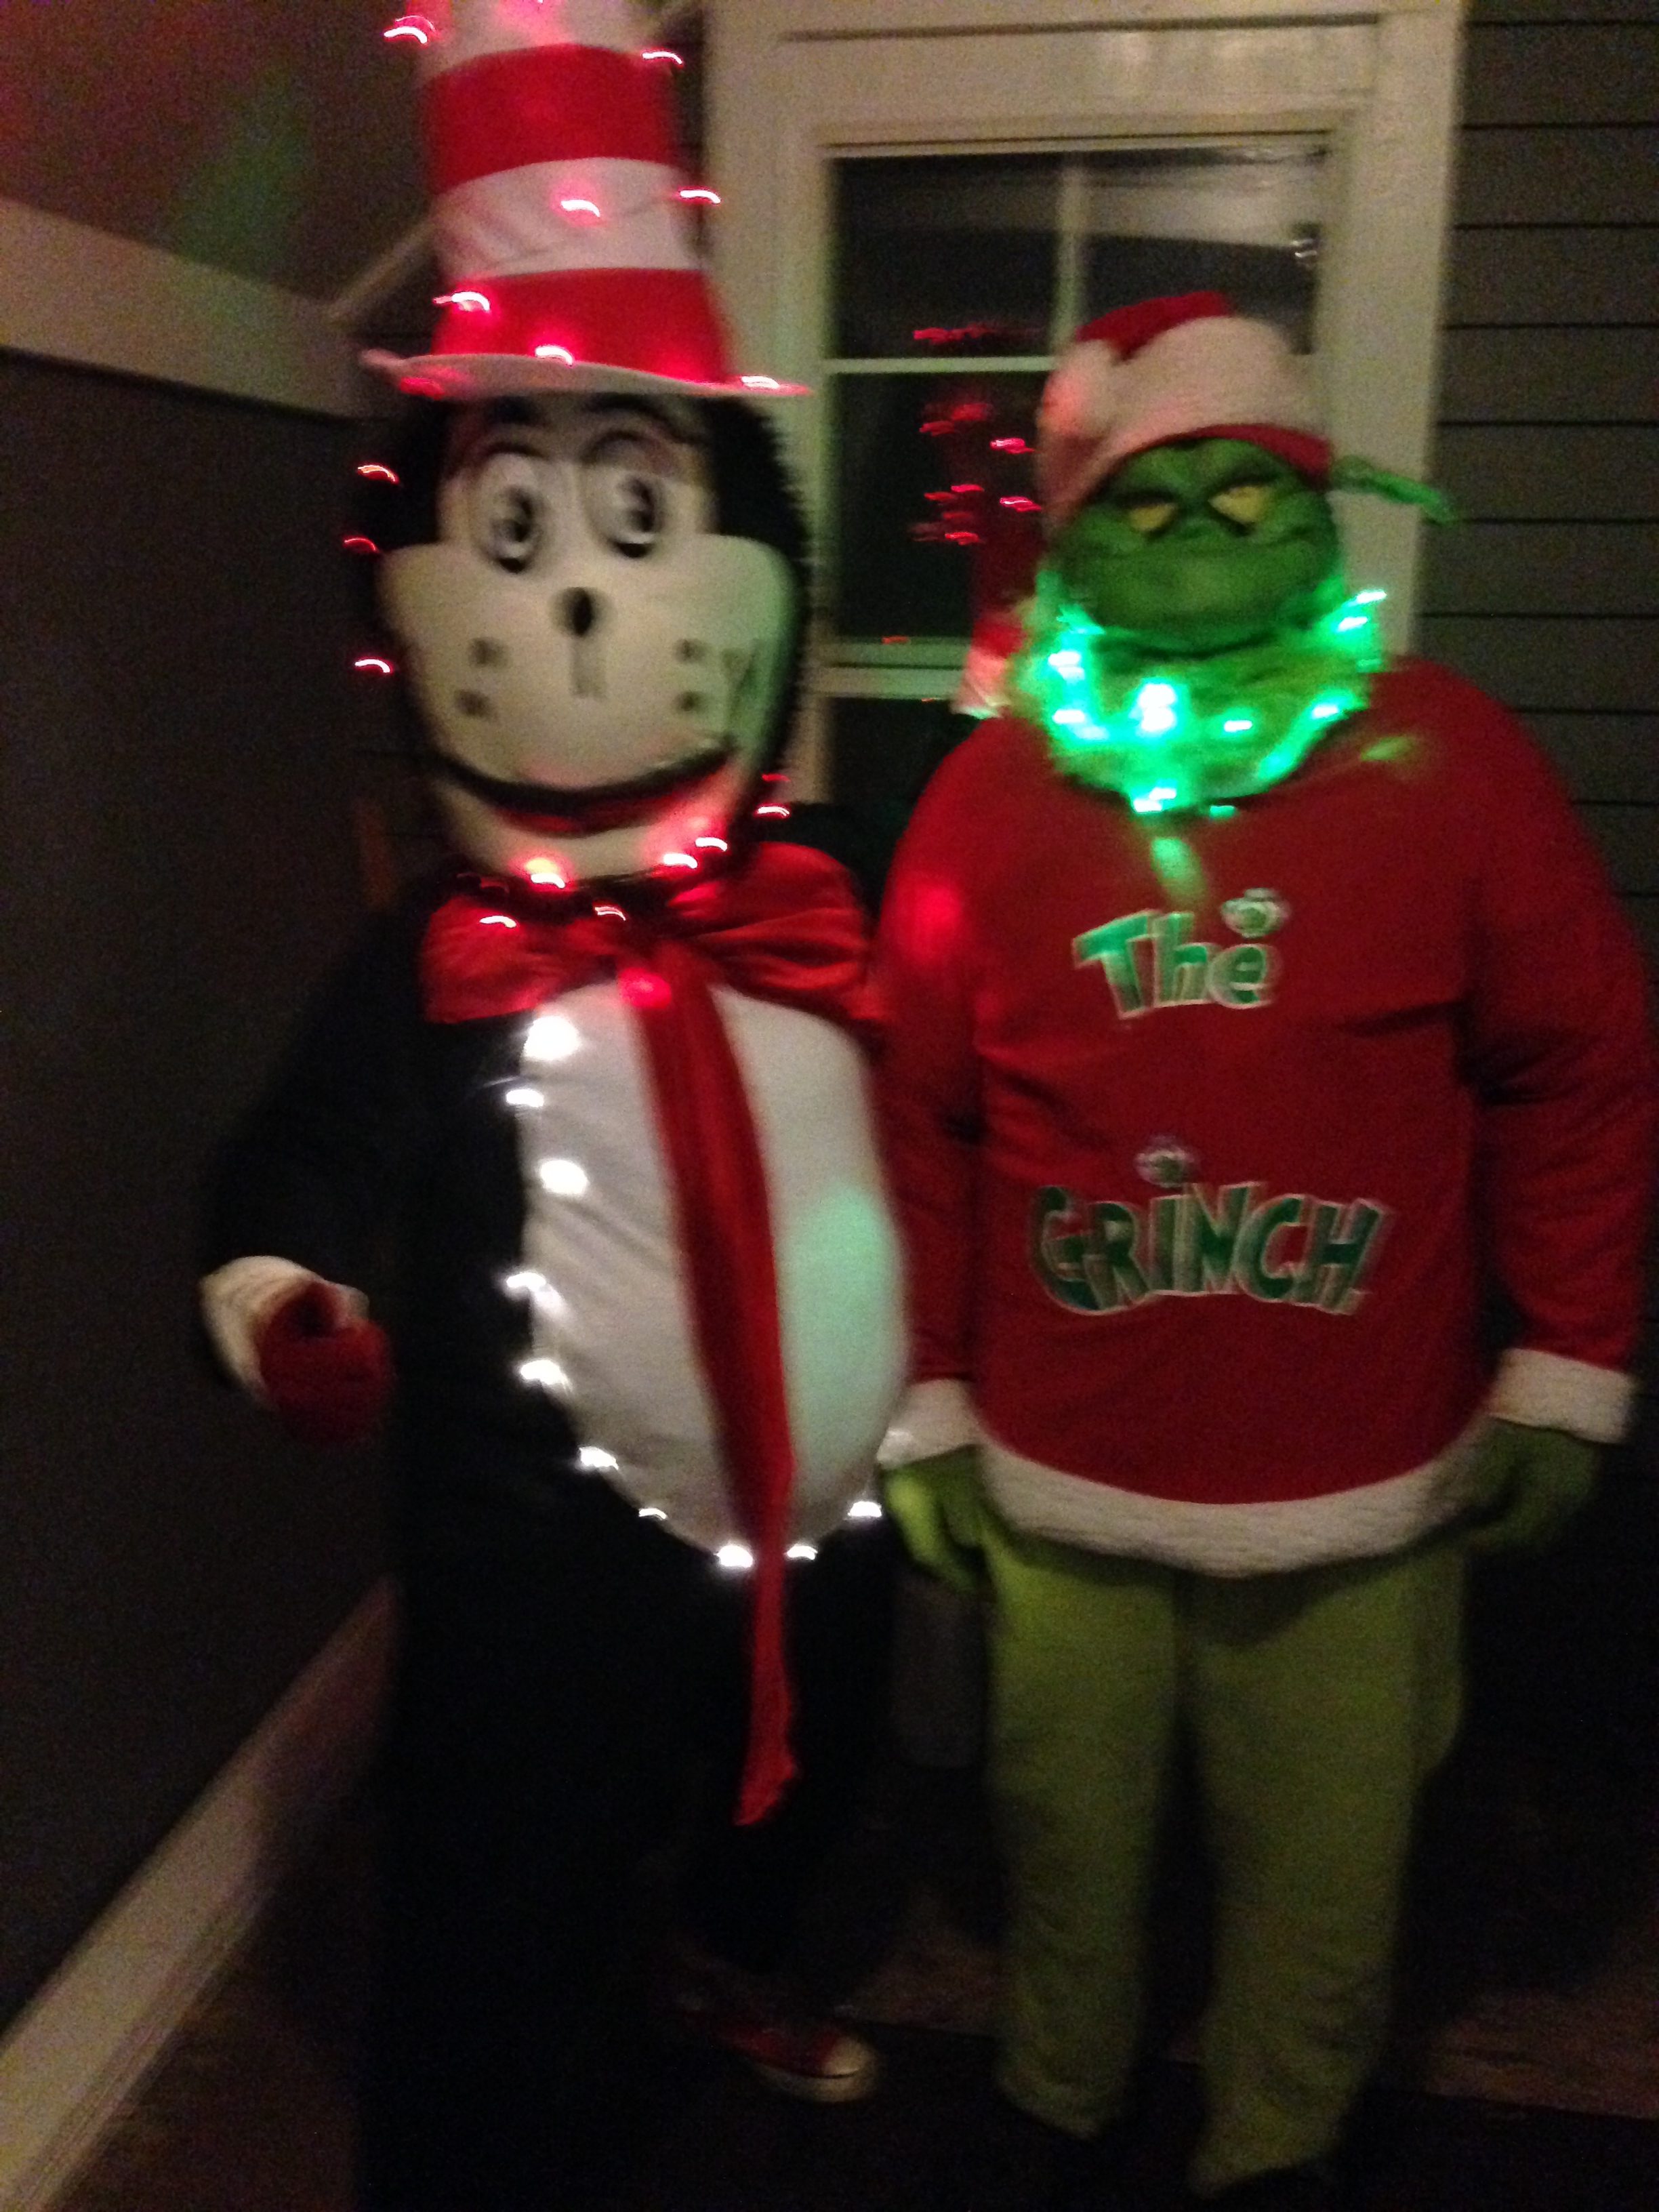 The Grinch Grinches The Cat In The Hat House